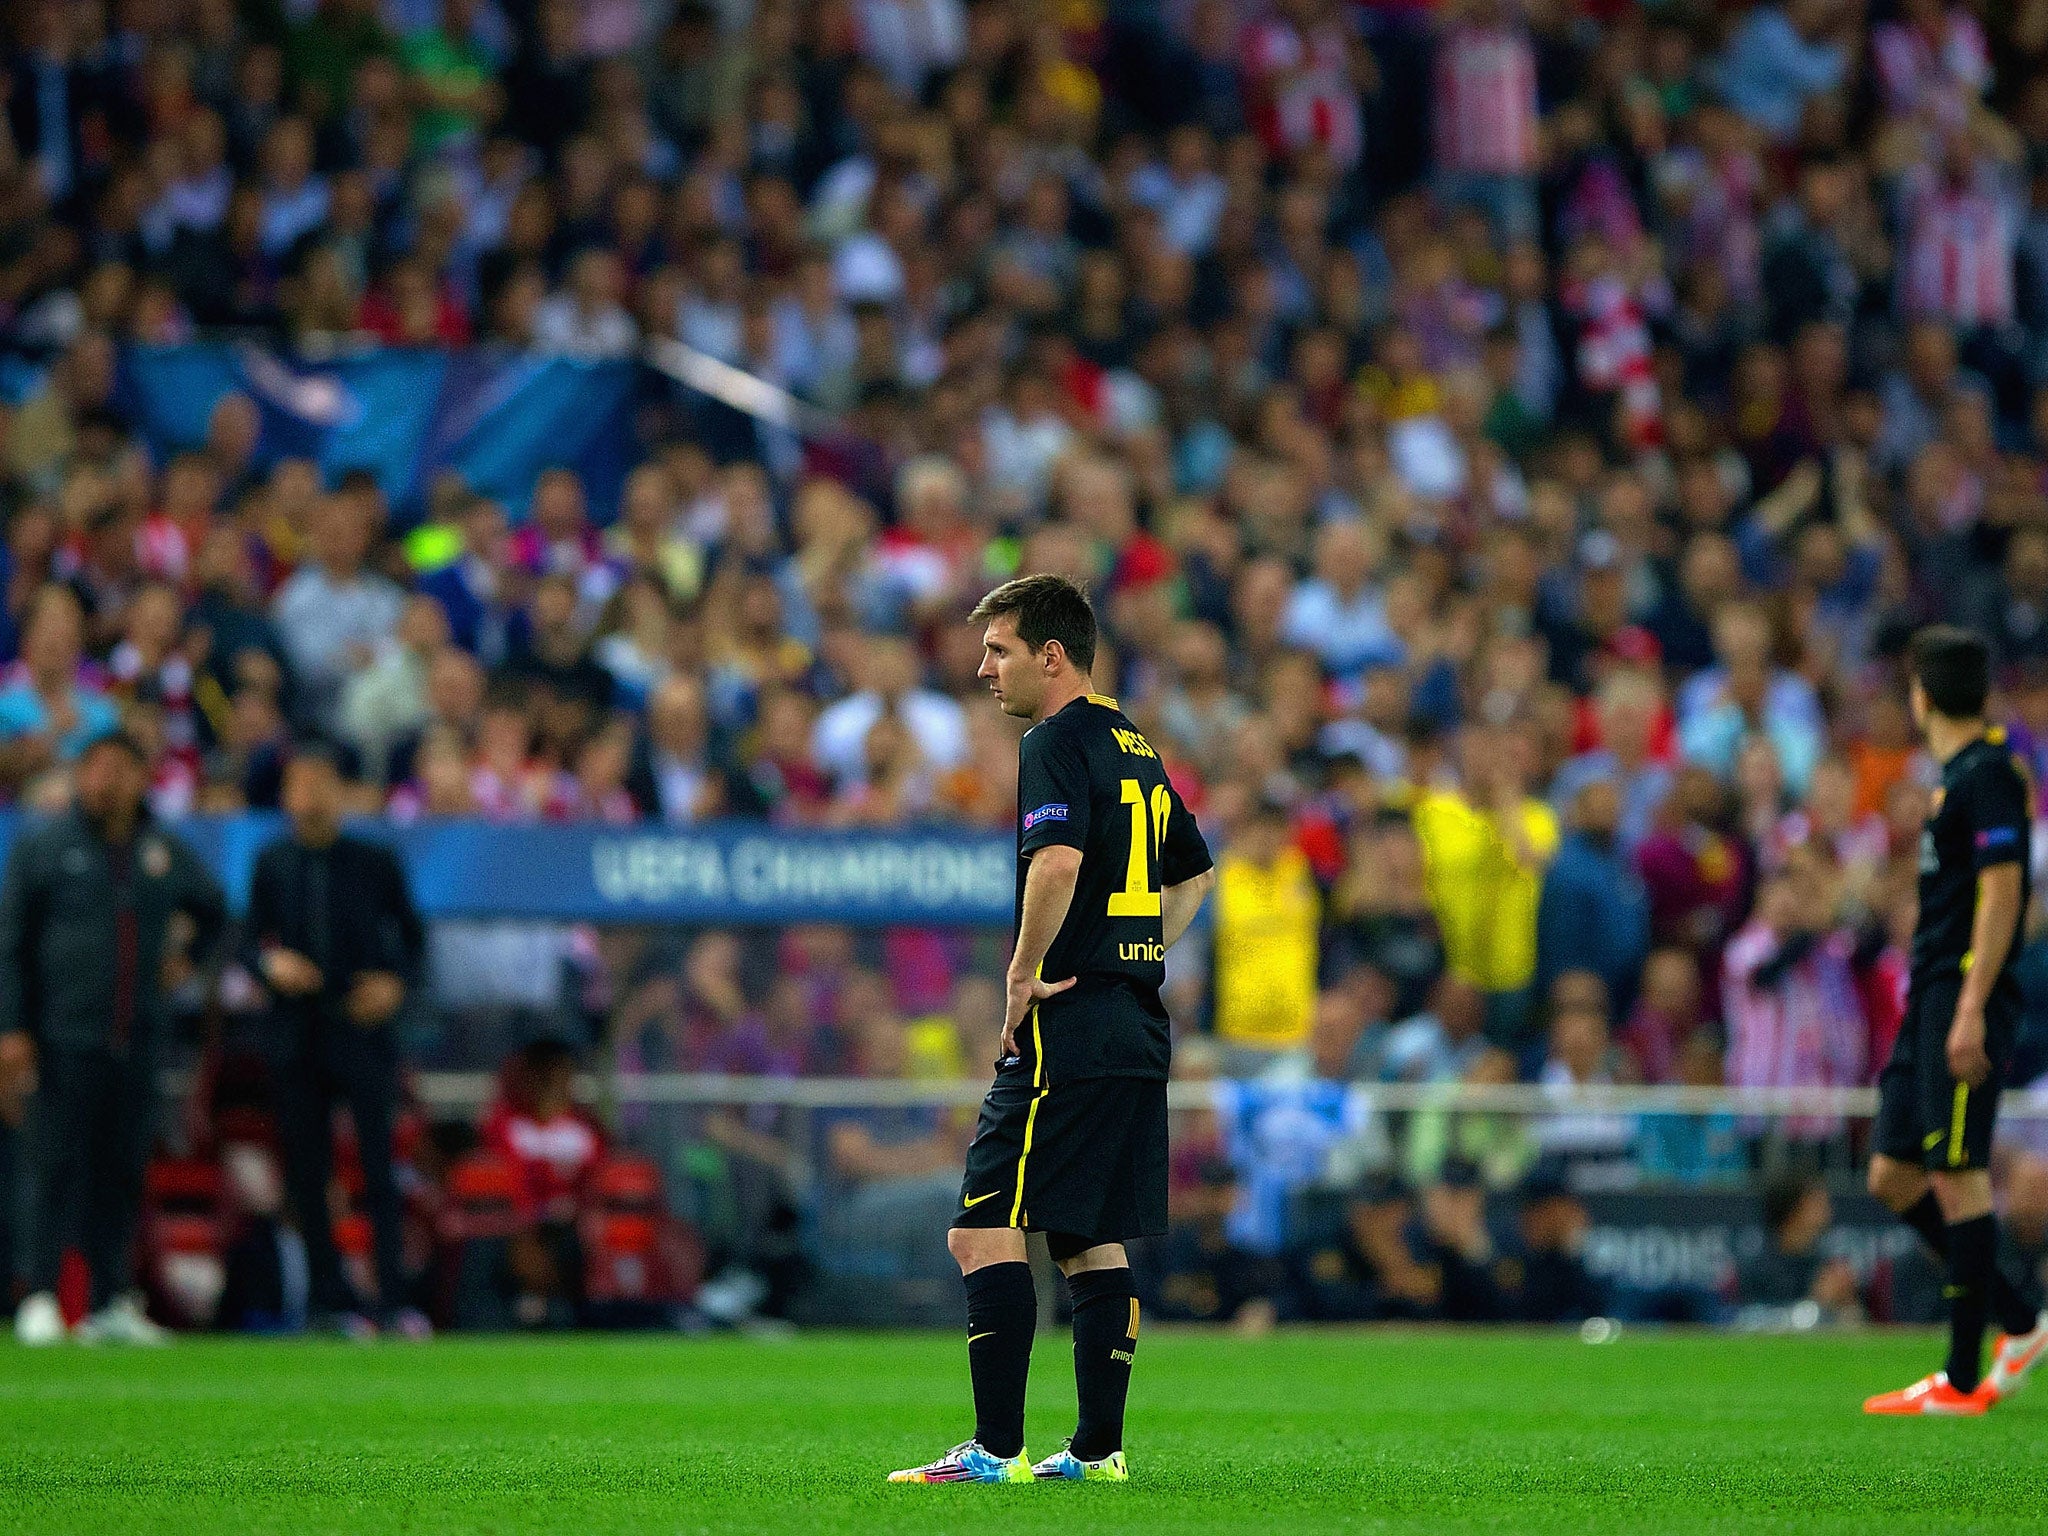 A dejected Lionel Messi of Barcelona looks on during the Champions League defeat to Atletico Madrid